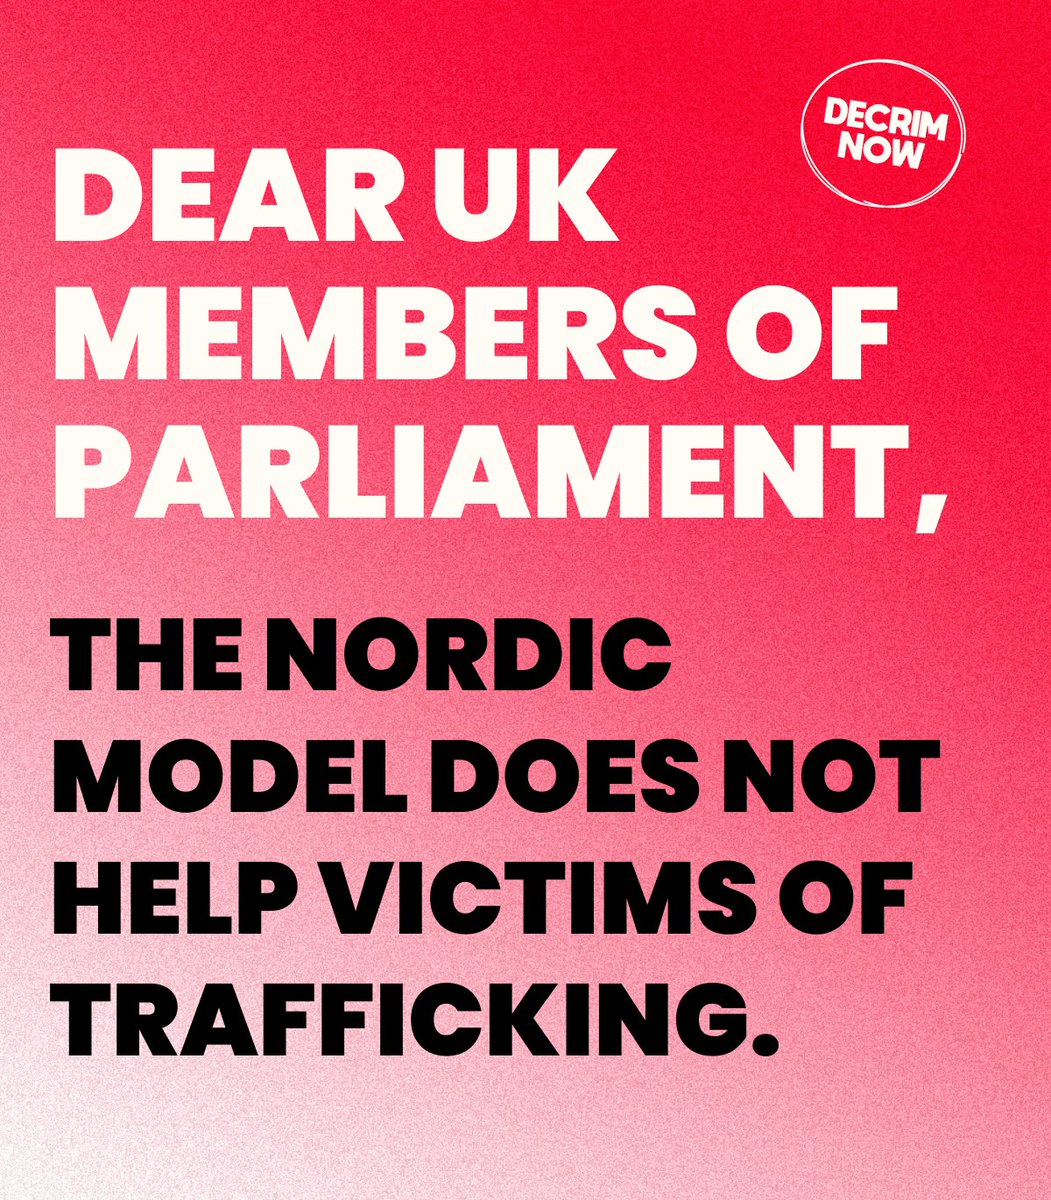  @libertyhq signed our open letter against the Nordic Model Liberty challenges injustice, defends freedom and campaigns to make sure everyone in the UK is treated fairly. Join us. Stand up to power.Read the letter here  https://decrimnow.org.uk/open-letter-on-the-nordic-model/  #NoToNordicModel